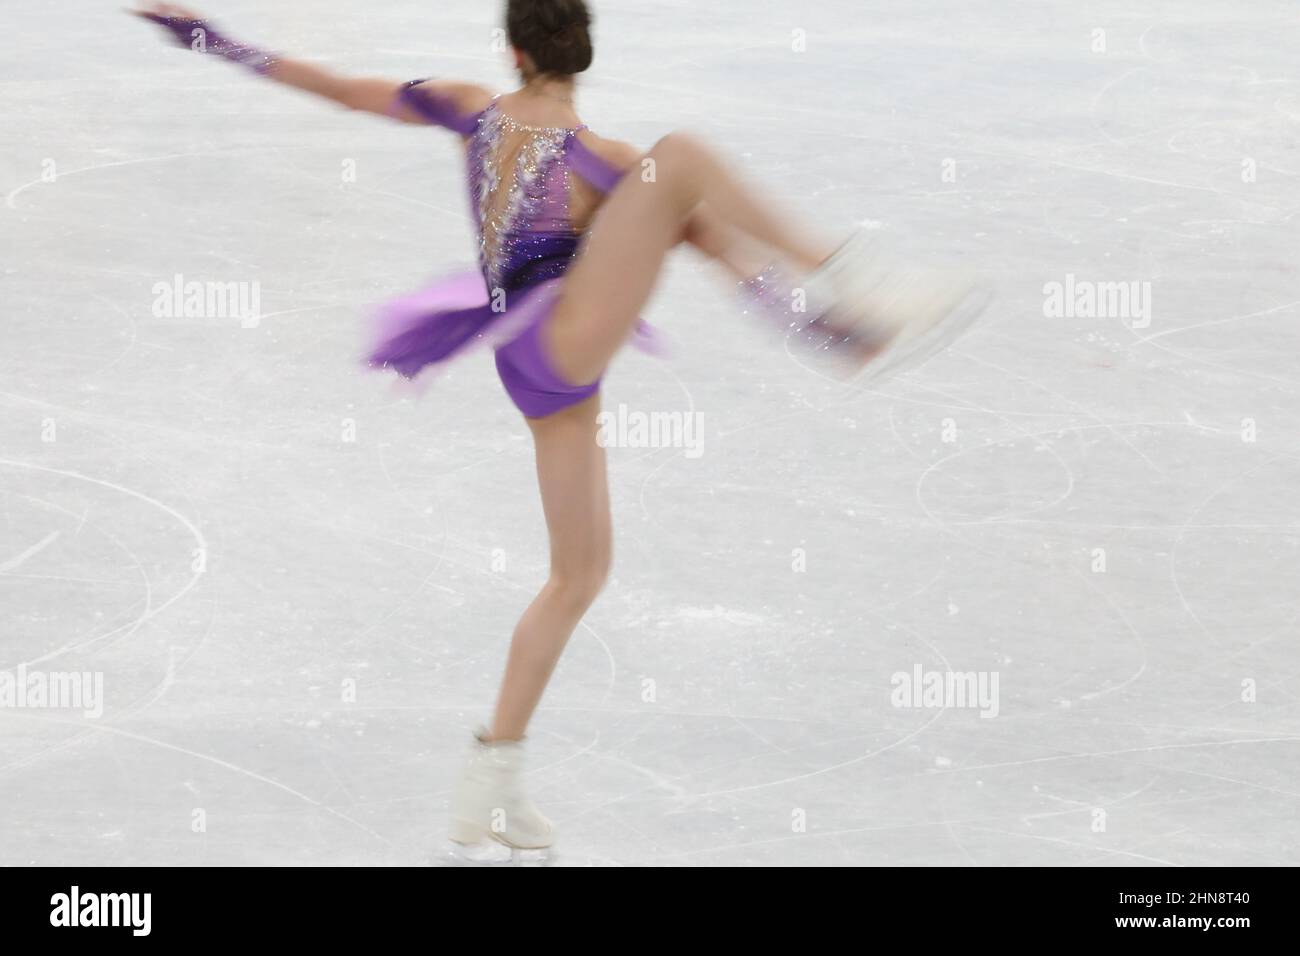 Beijing, China. 15th Feb, 2022. Kamila Valieva of the Russian Olympic Committee (ROC) competes in the Women's Single Skating Short Program at the Beijing 2022 Winter Olympic Games at the Capital Indoor Stadium on February 15th 2021 in Beijing, China Credit: Mickael Chavet/Alamy Live News Stock Photo